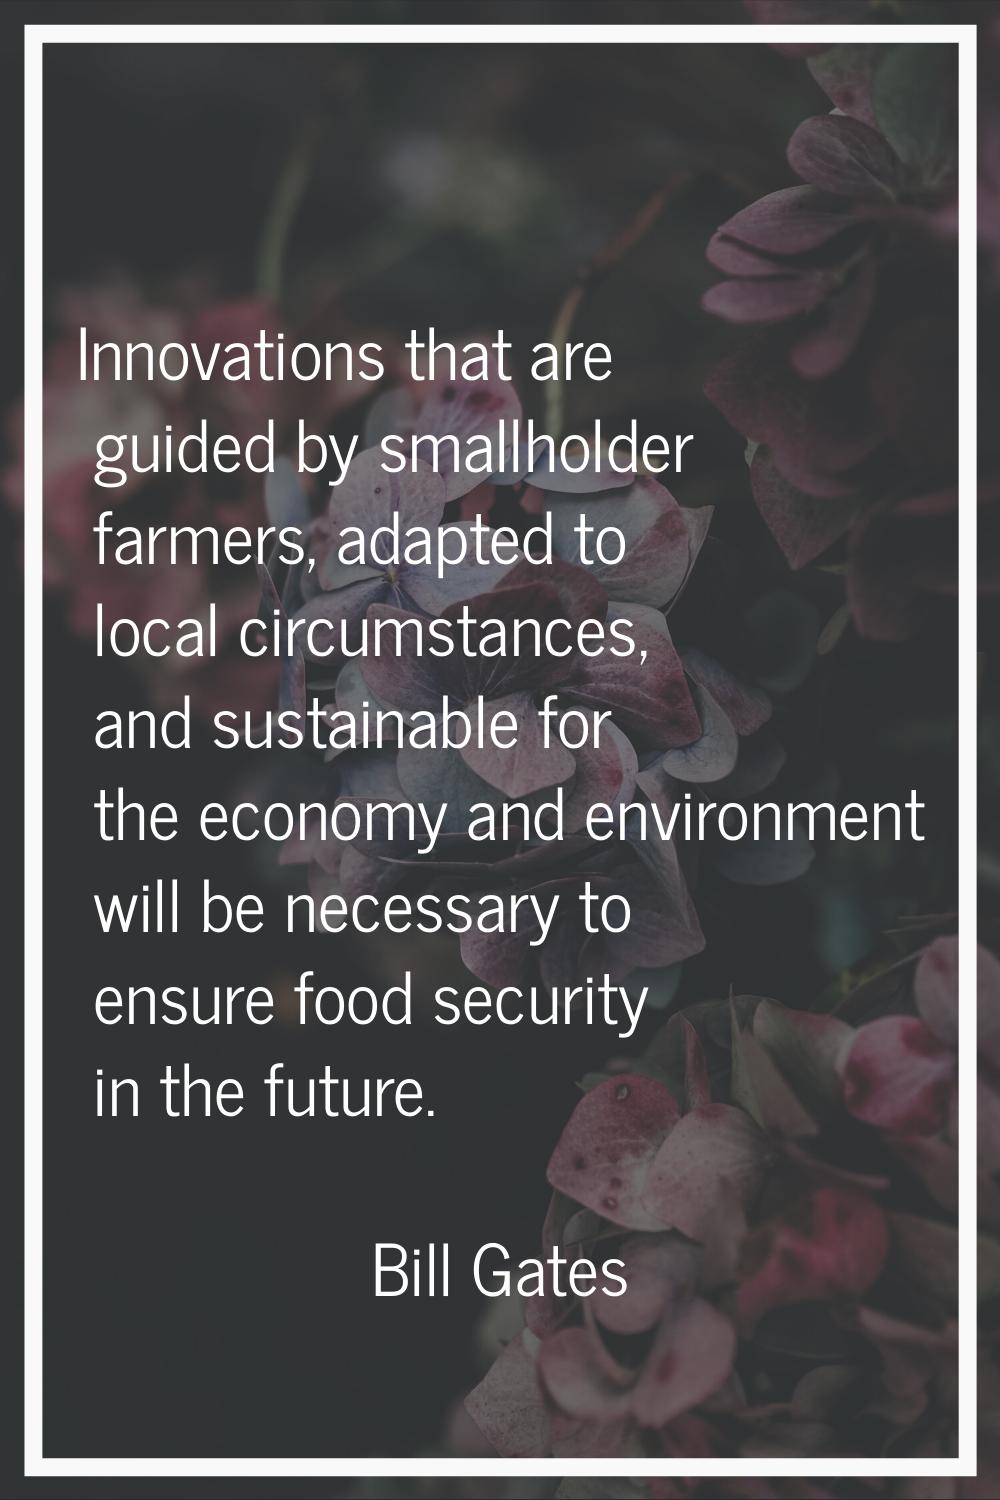 Innovations that are guided by smallholder farmers, adapted to local circumstances, and sustainable